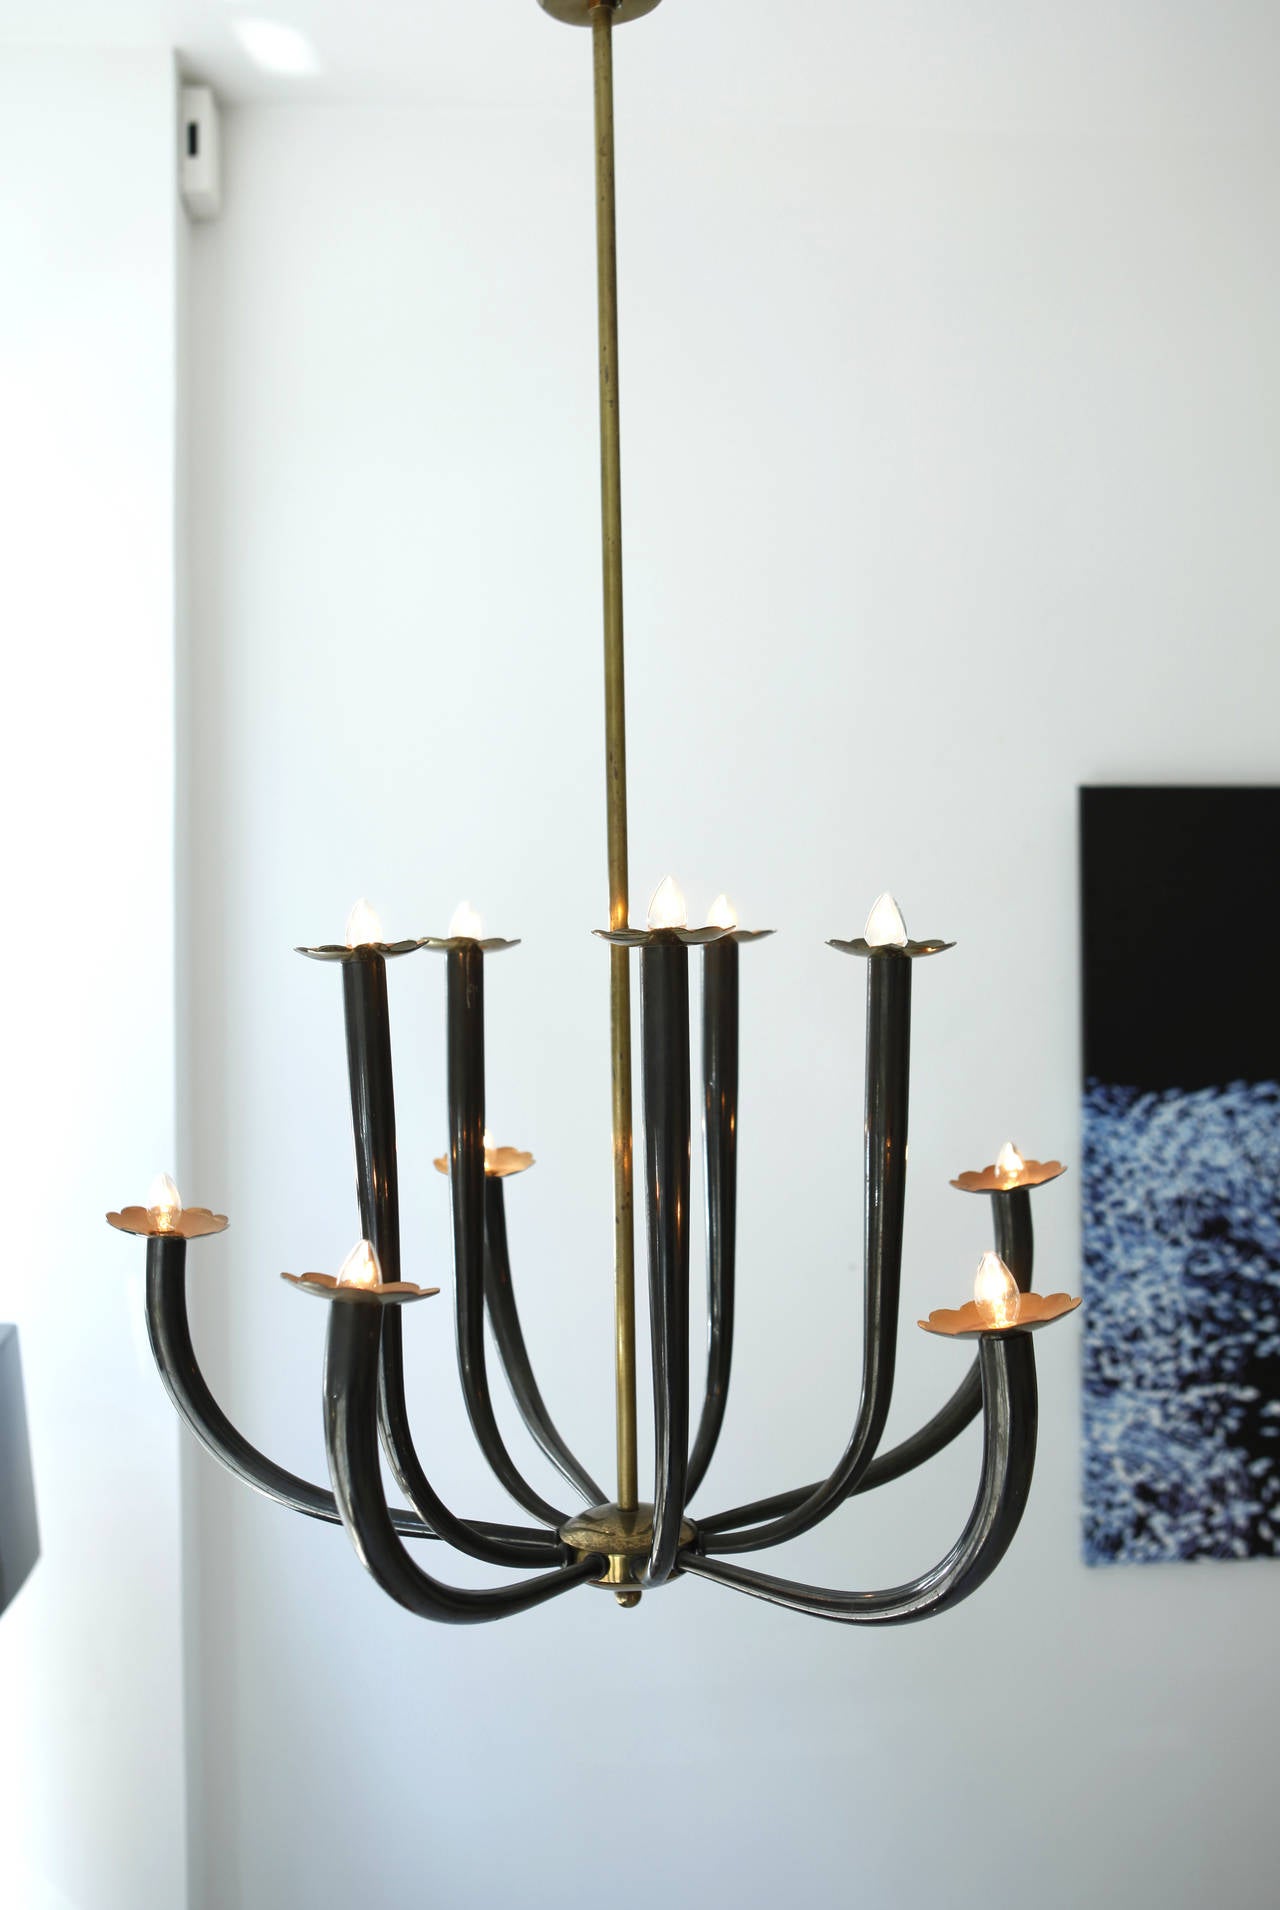 Italian G. Ulrich Chandelier with Ten Lights, circa 1940s For Sale